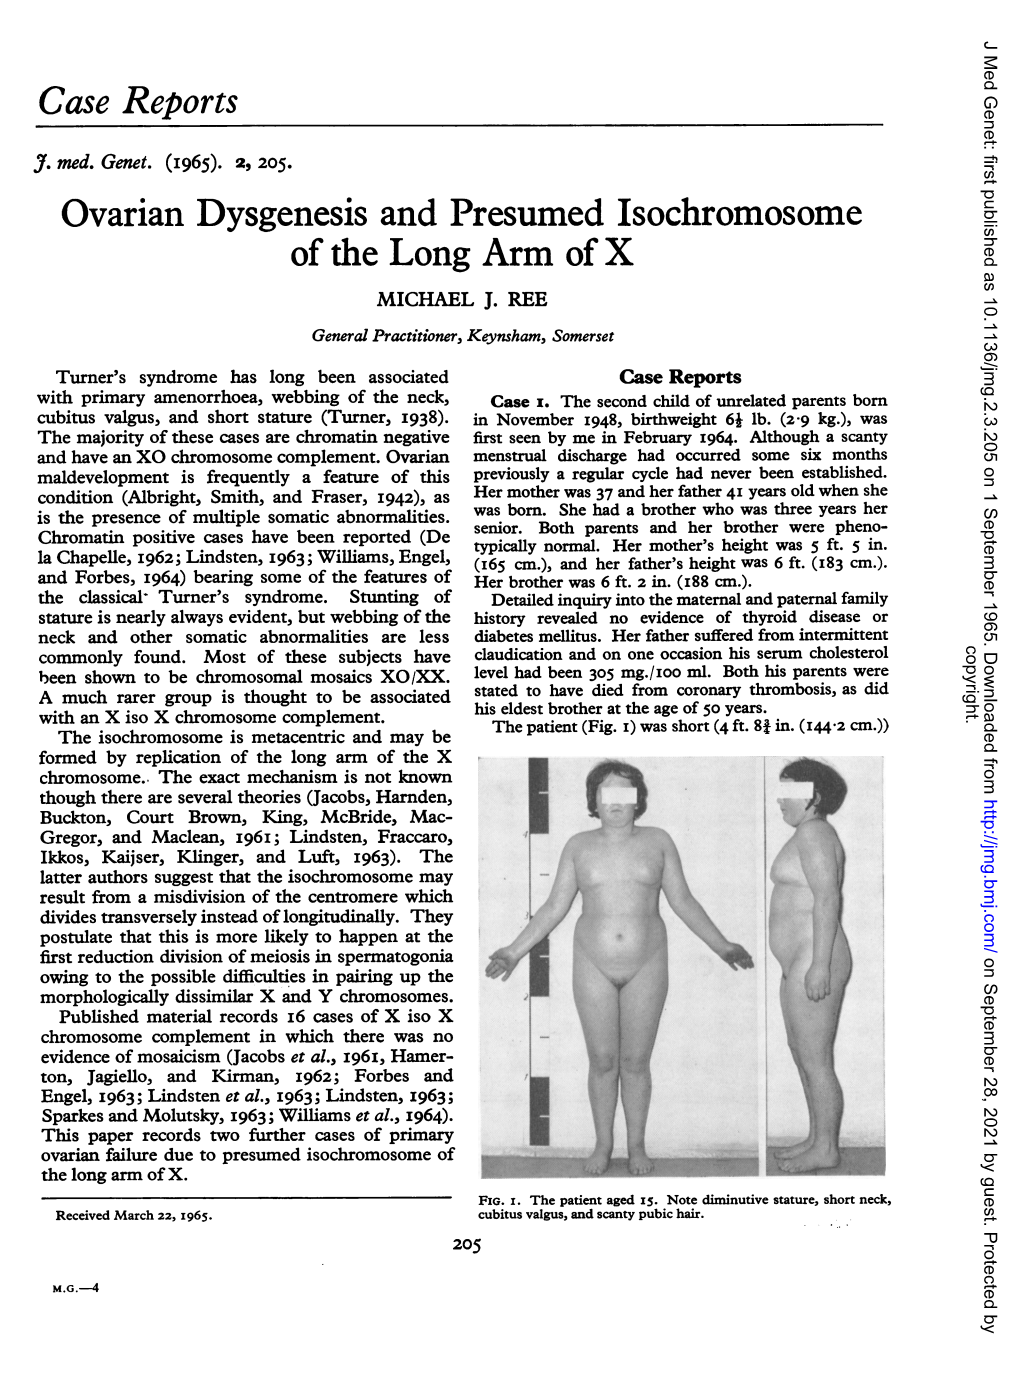 Ovarian Dysgenesis and Presumed Isochromosome of the Long Arm of X MICHAEL J